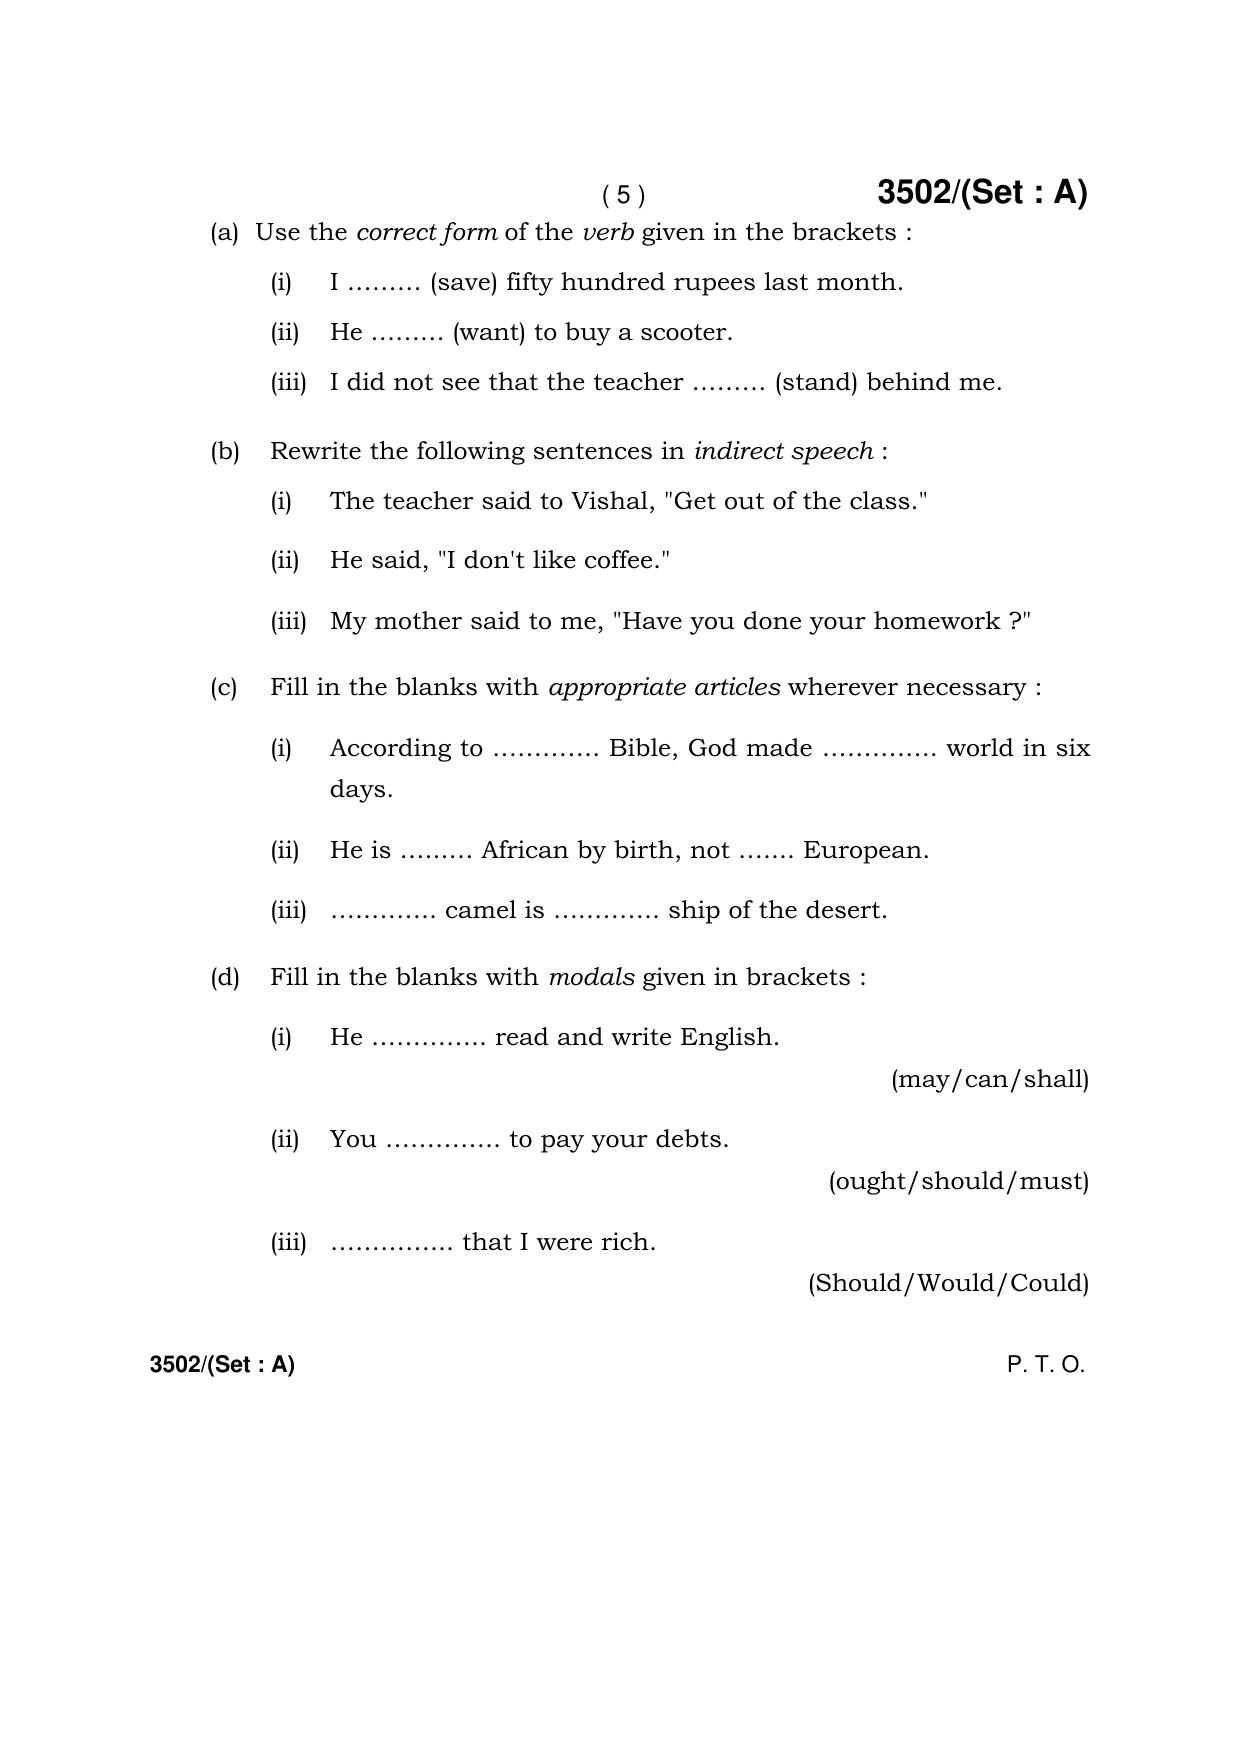 Haryana Board HBSE Class 10 English -A 2018 Question Paper - Page 5